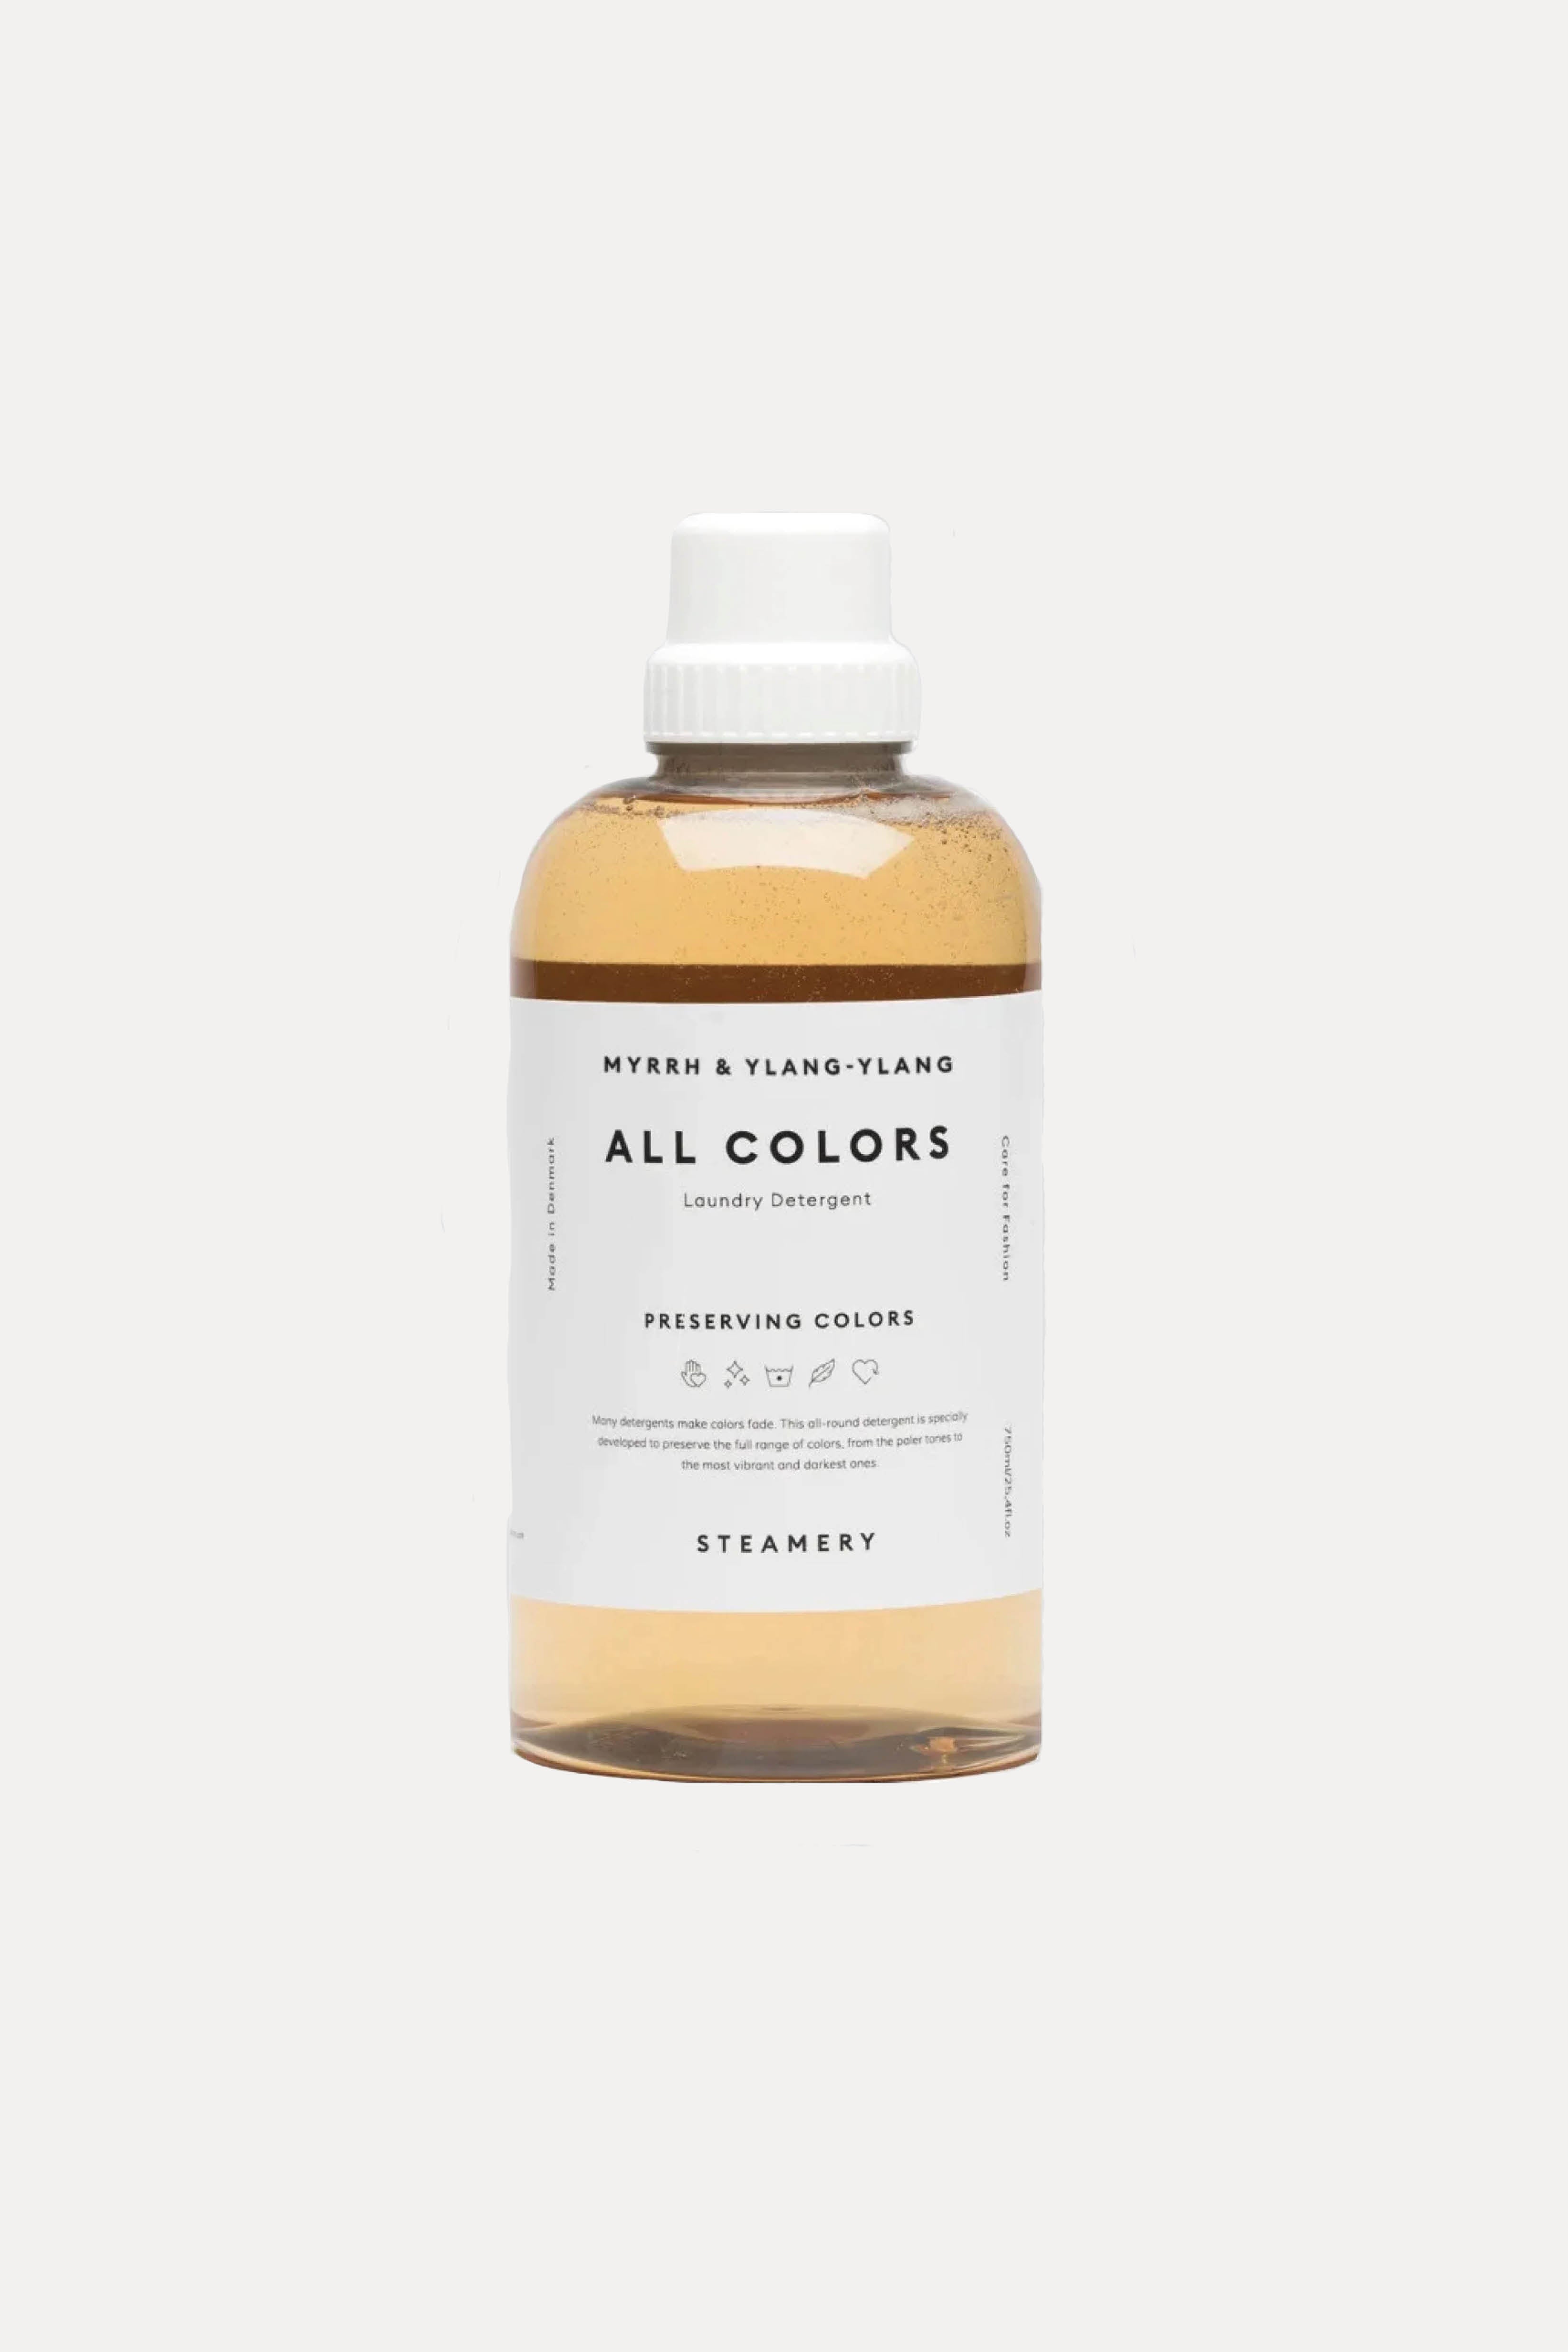 Steamery | all colors laundry detergent